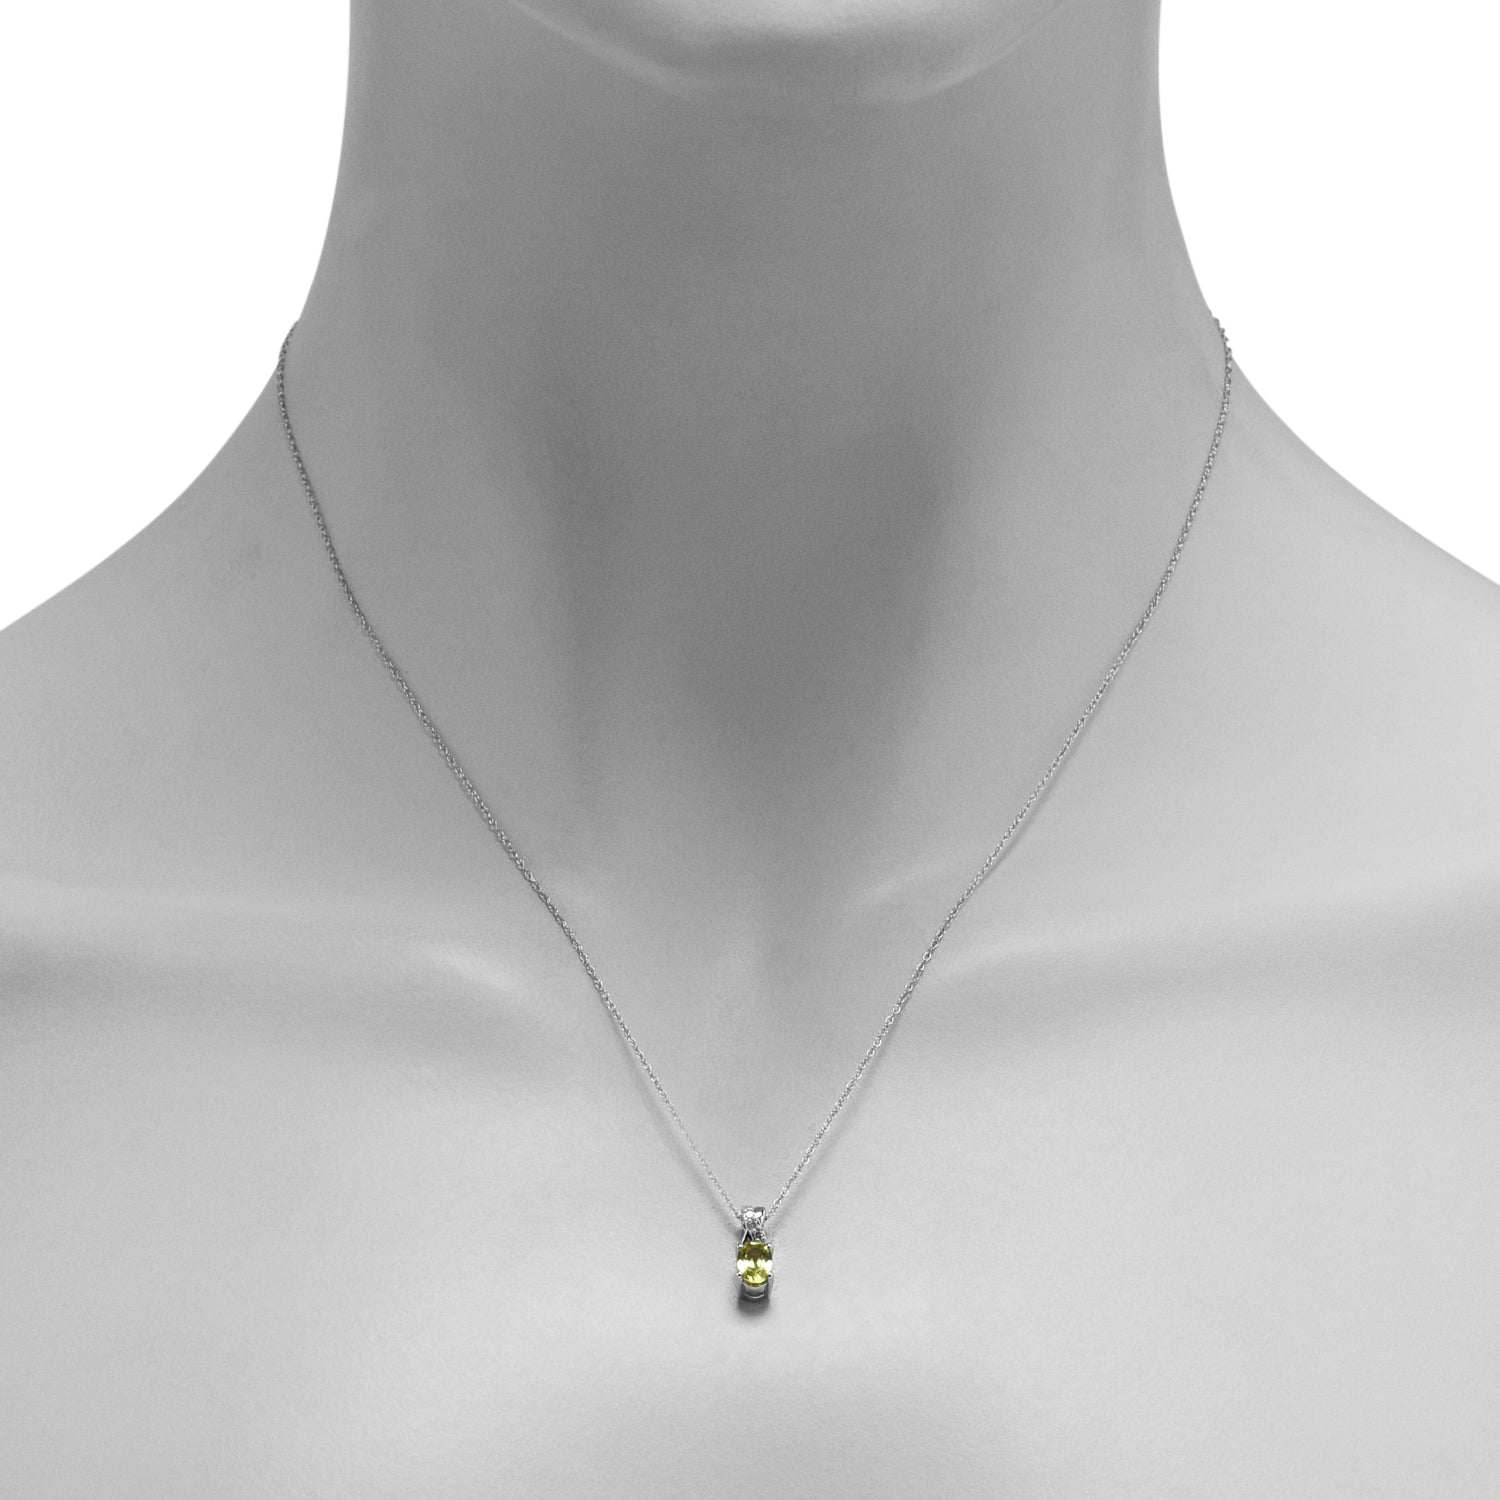 Oval Peridot Necklace in 10kt White Gold with Diamonds (1/20ct tw)